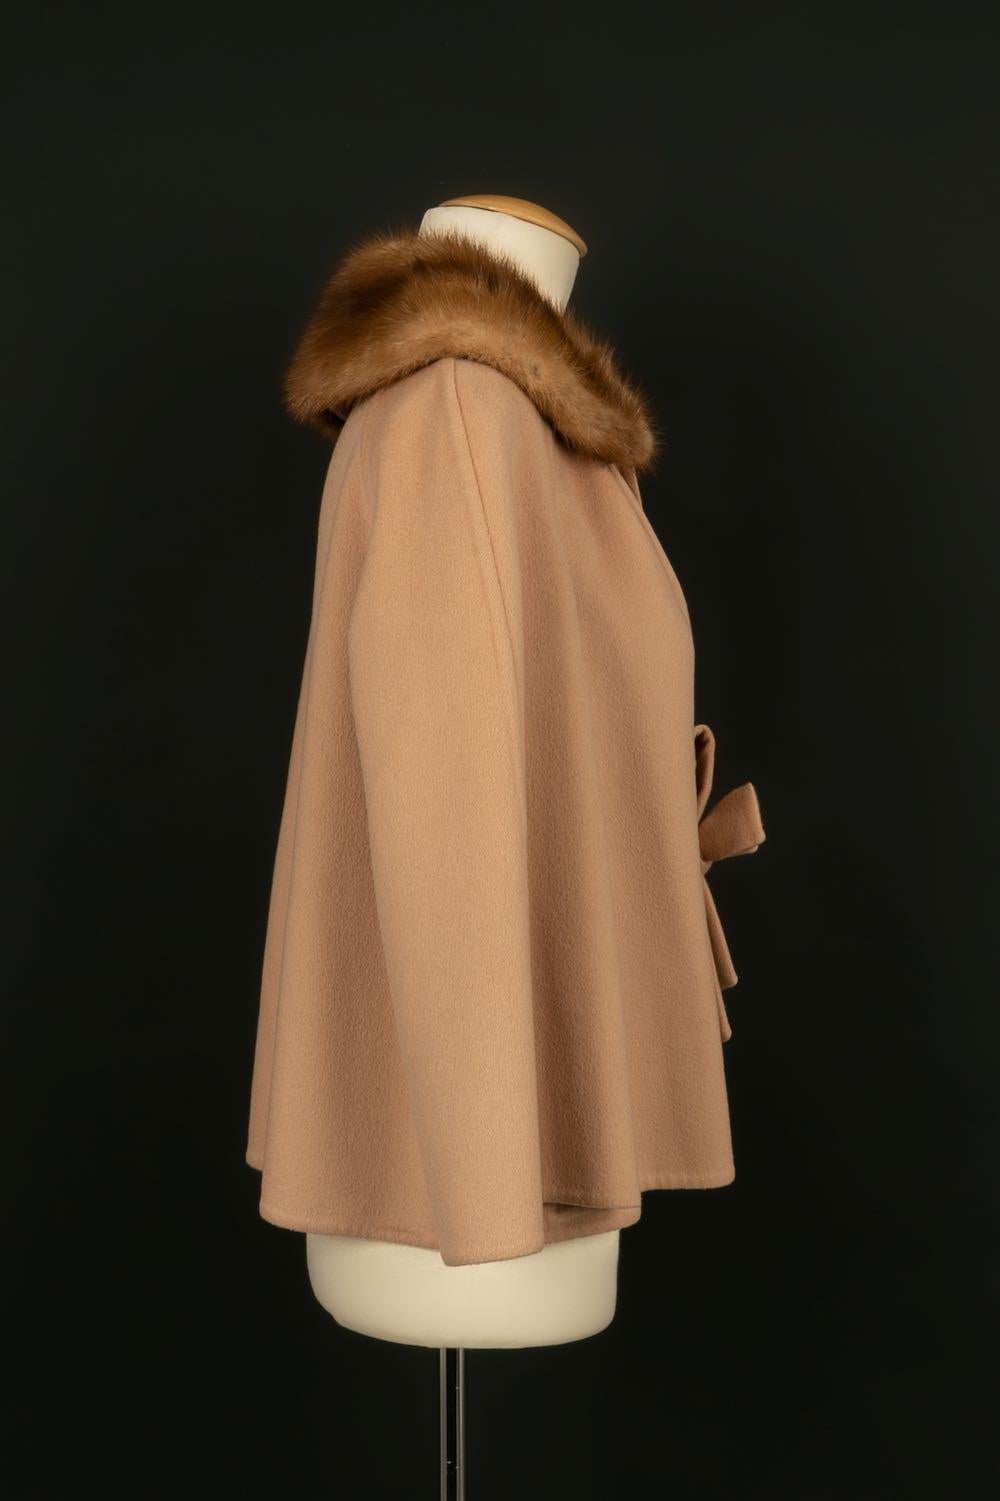 Dior -(Made in Italy) Short cape in beige cashmere. Size 36FR. Collection 2009.

Additional information: 
Dimensions: Shoulder width: 42 cm, Length: 52 cm
Condition: Very good condition
Seller Ref number: M64